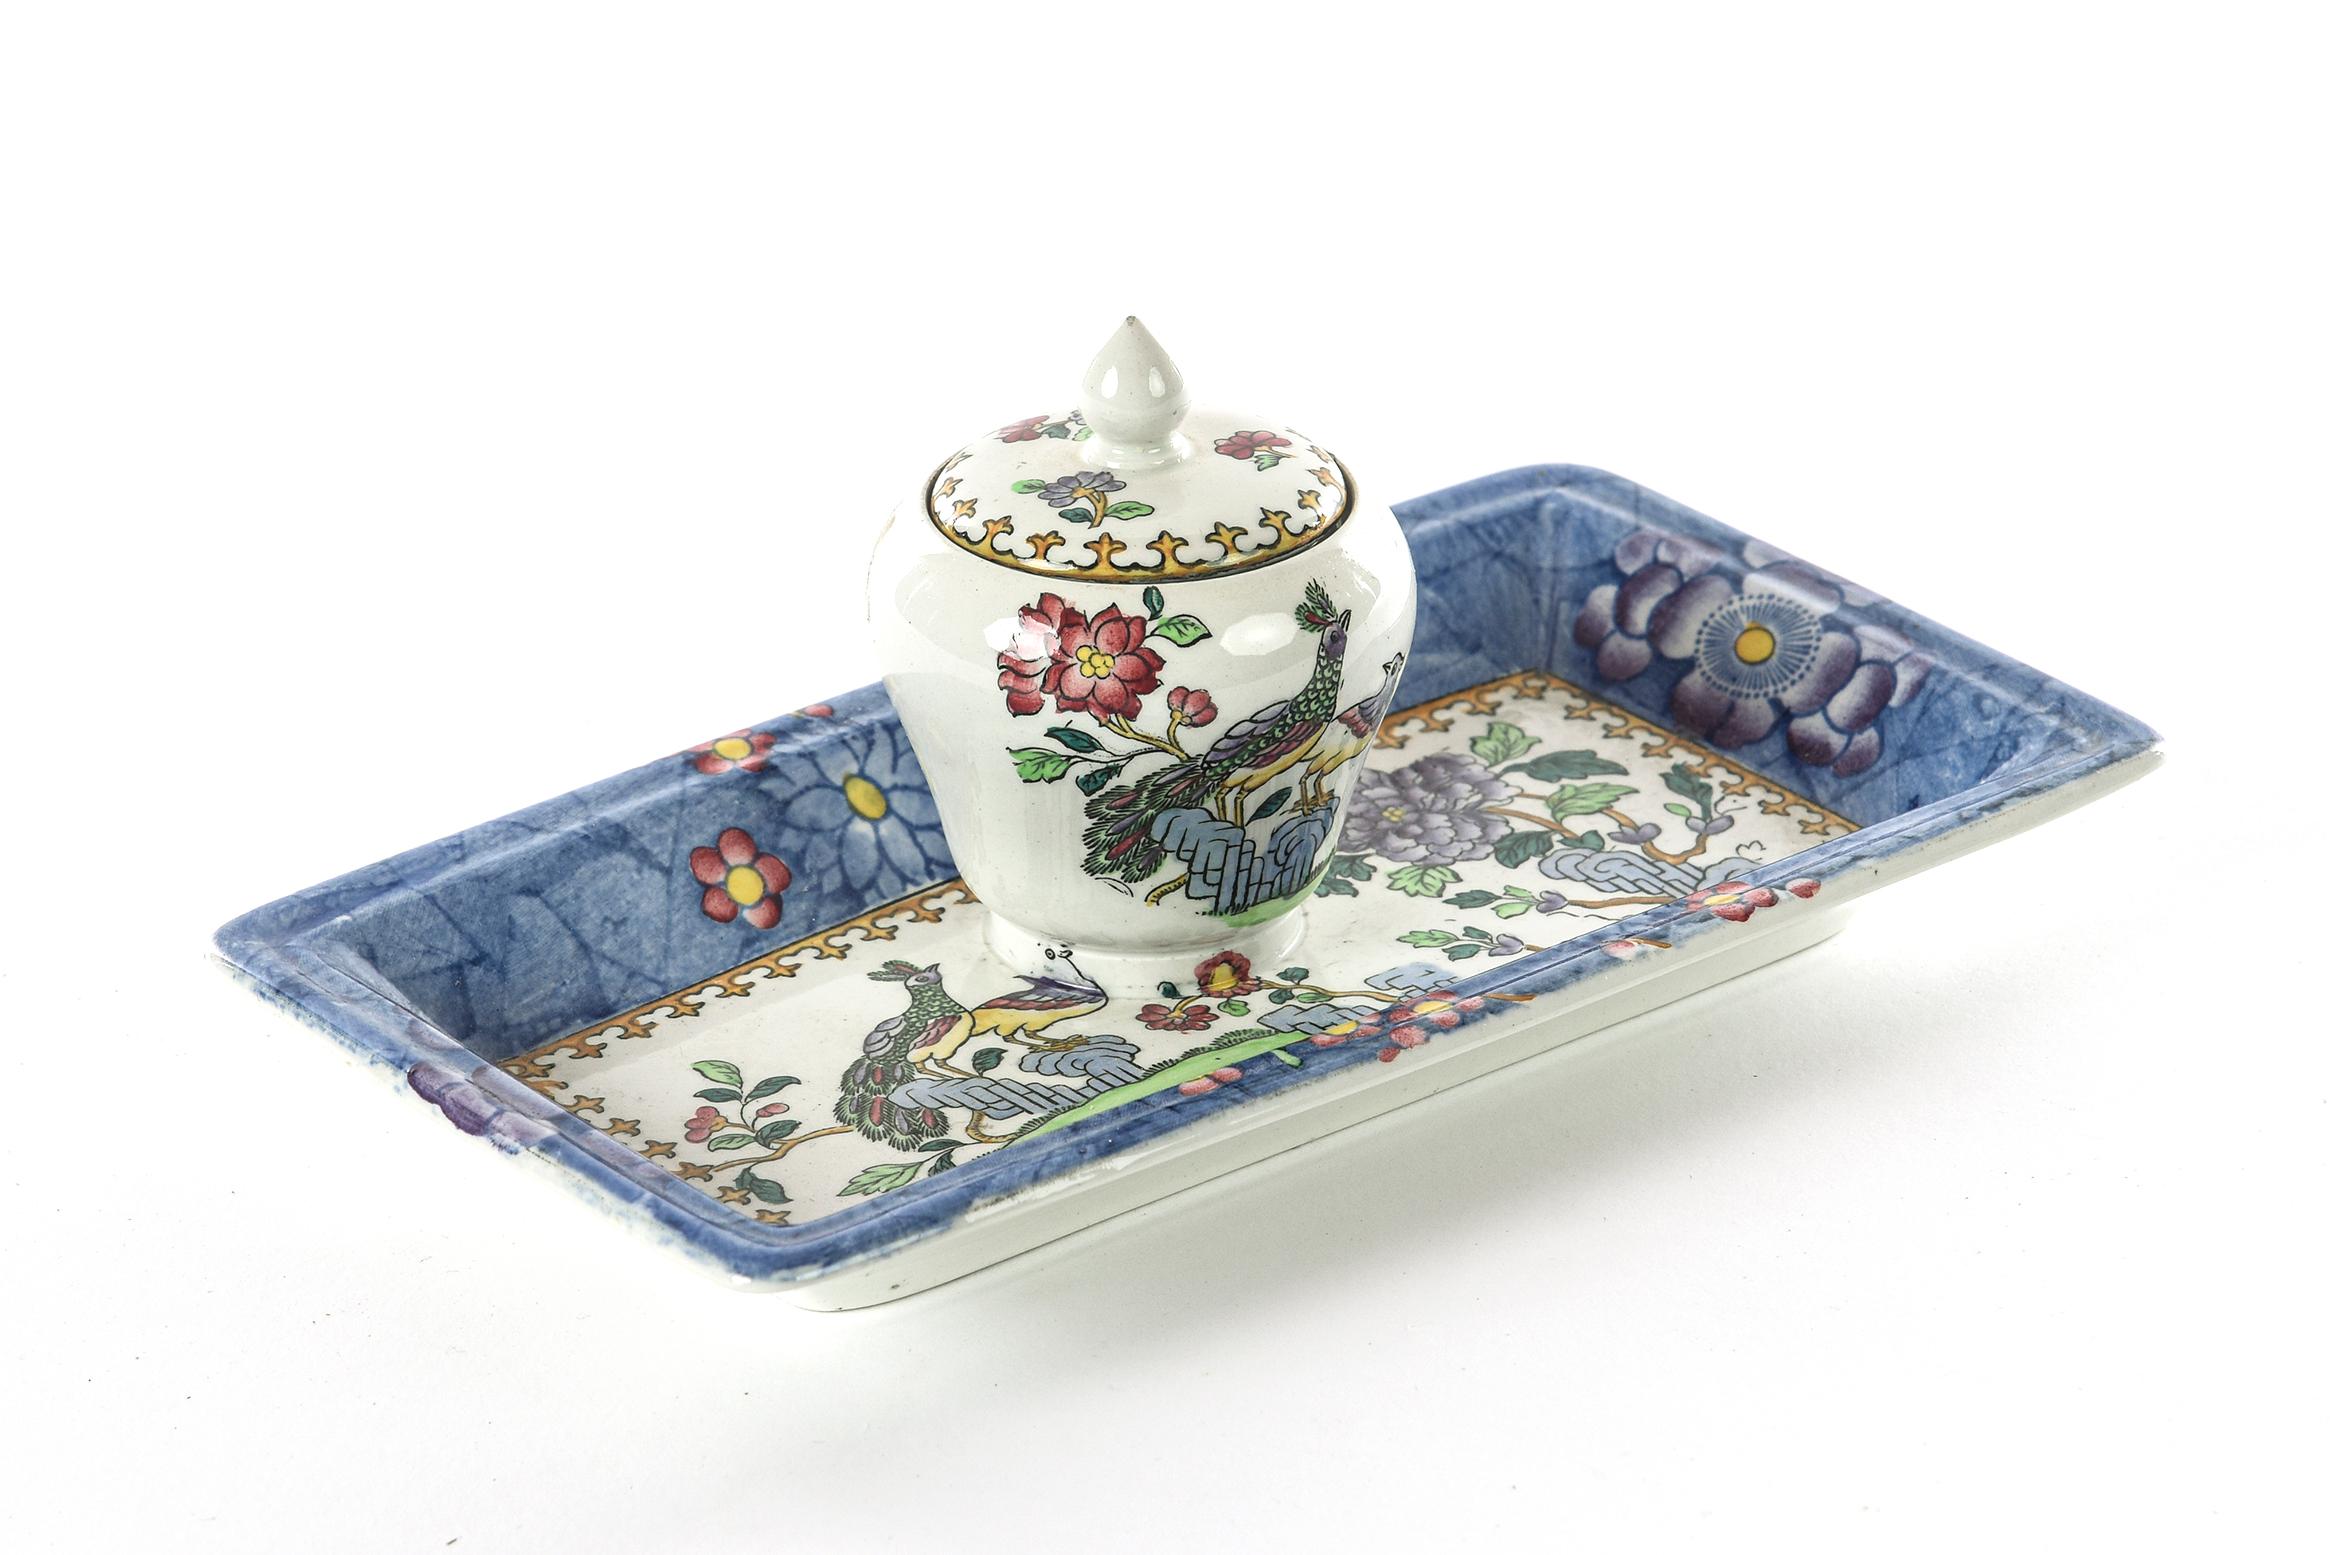 A charming piece of Spode Porcelain with an intricate design from one of Peacock series. The design and colors remain crisp and the inkwell is in very good antique condition.